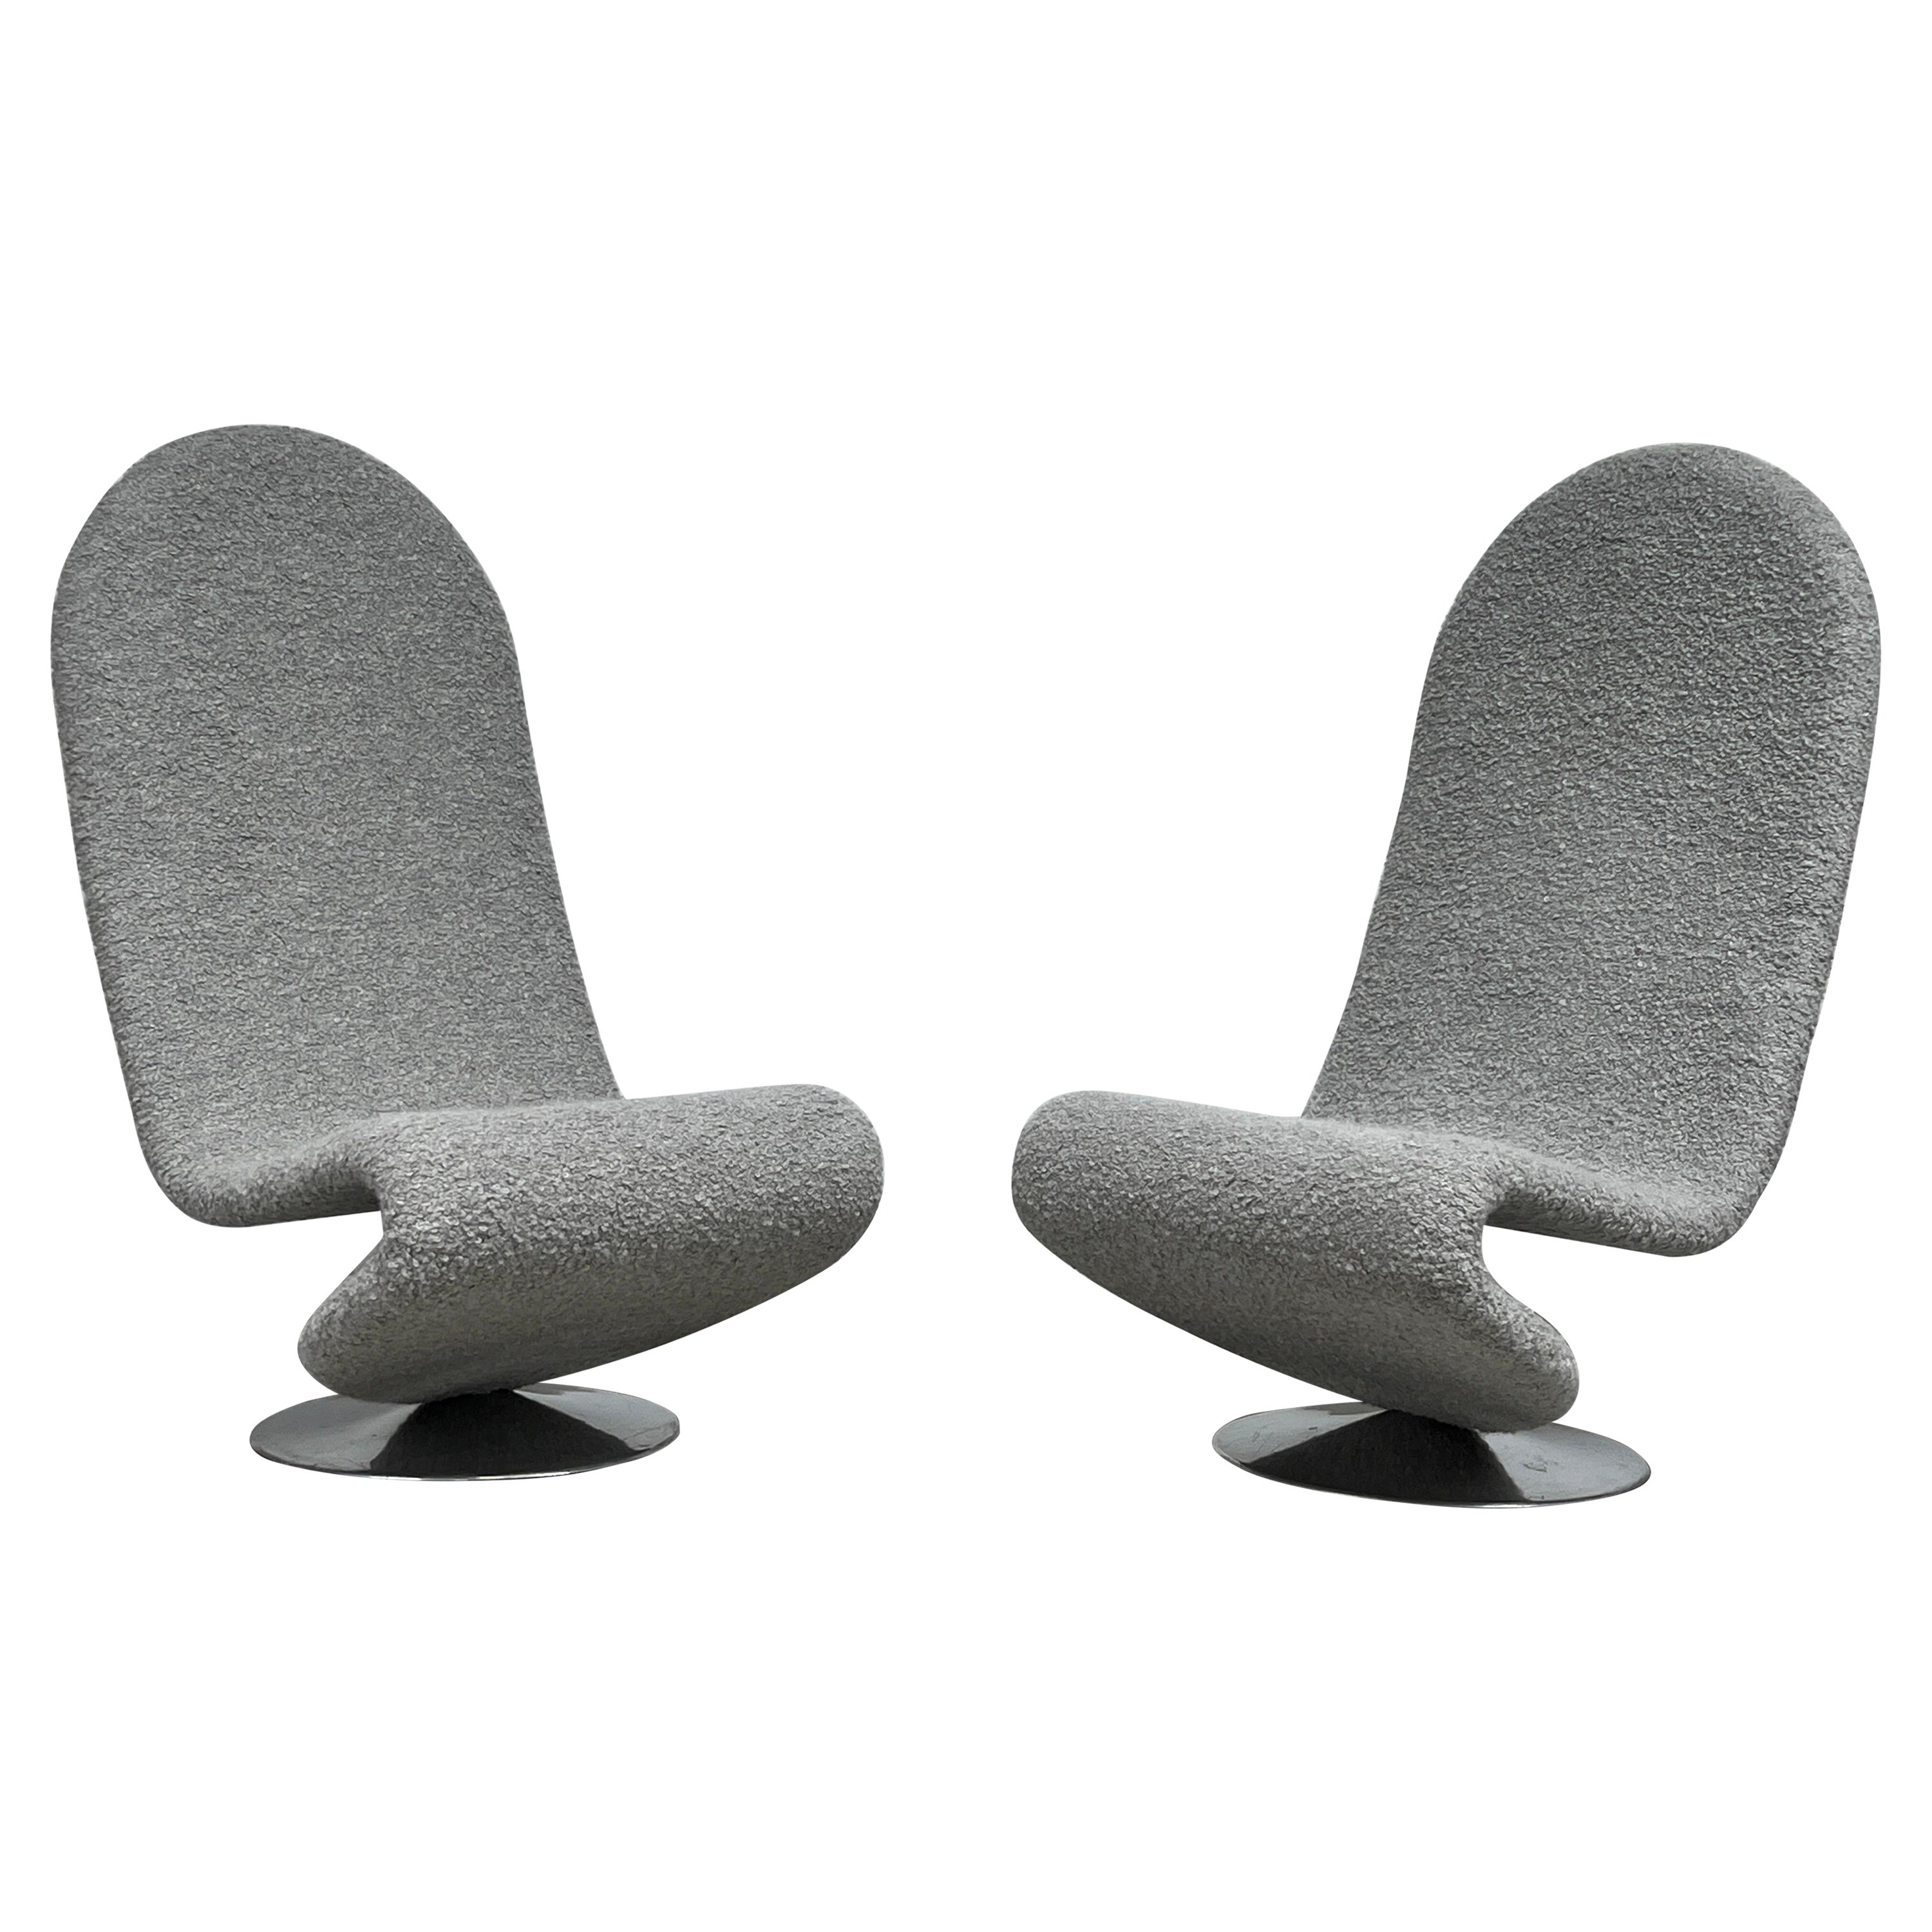 Pair of High Back Lounge Chairs by Verner Panton For Sale